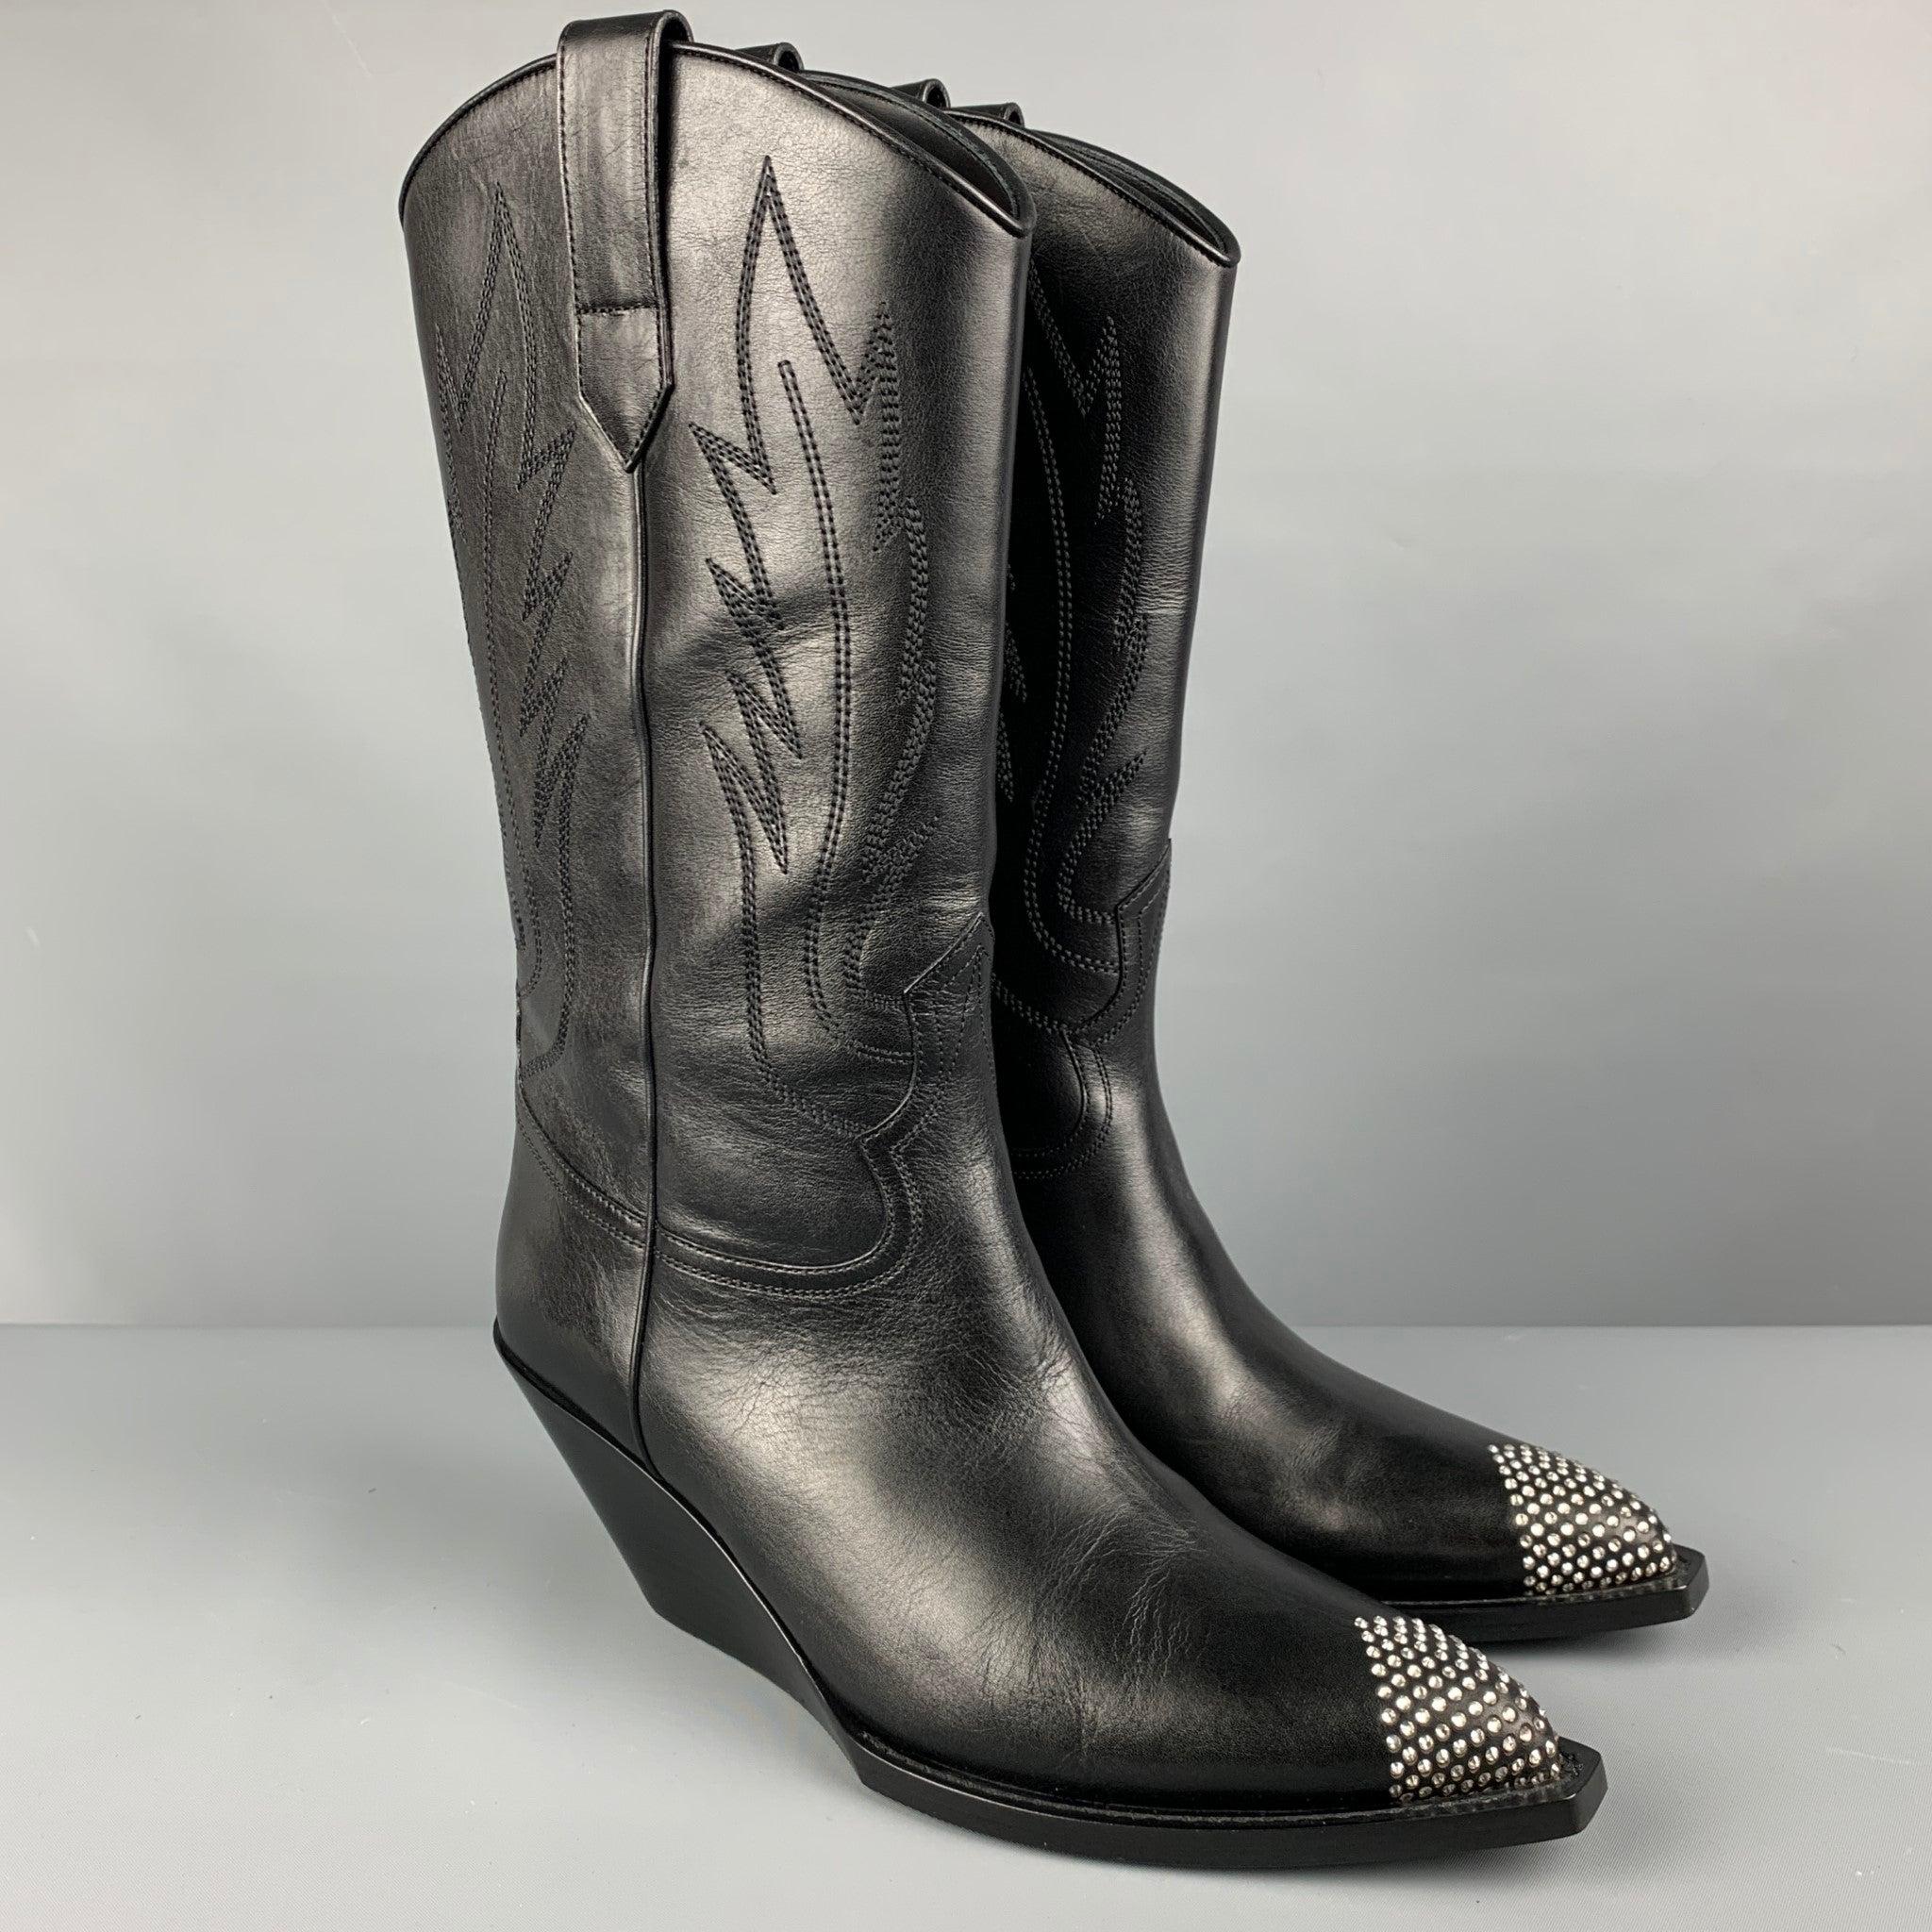 CELINE boots in a black calfskin leather featuring rhinestone toe, and wedge heel.Very Good Pre-Owned Condition. 

Marked:   IT 41 

Measurements: 
  Length: 11.5 inches Width: 4 inches Height: 14.5 inches 
  
  
 
Reference: 127022
Category: